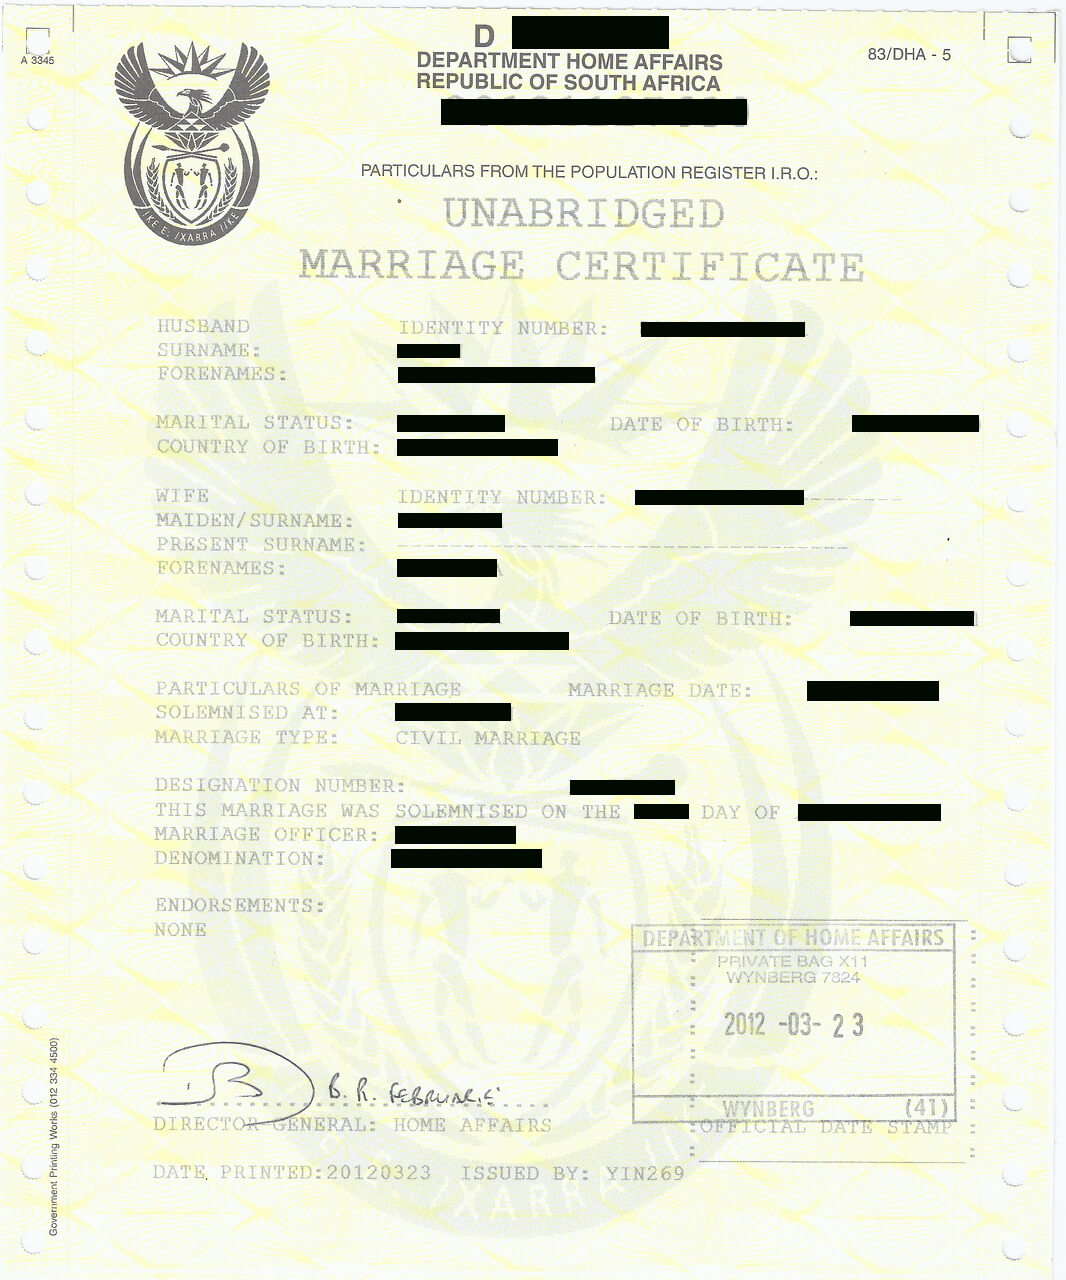 025 Unabridged Marriage Certificate Sample Of Template In South African Birth Certificate Template